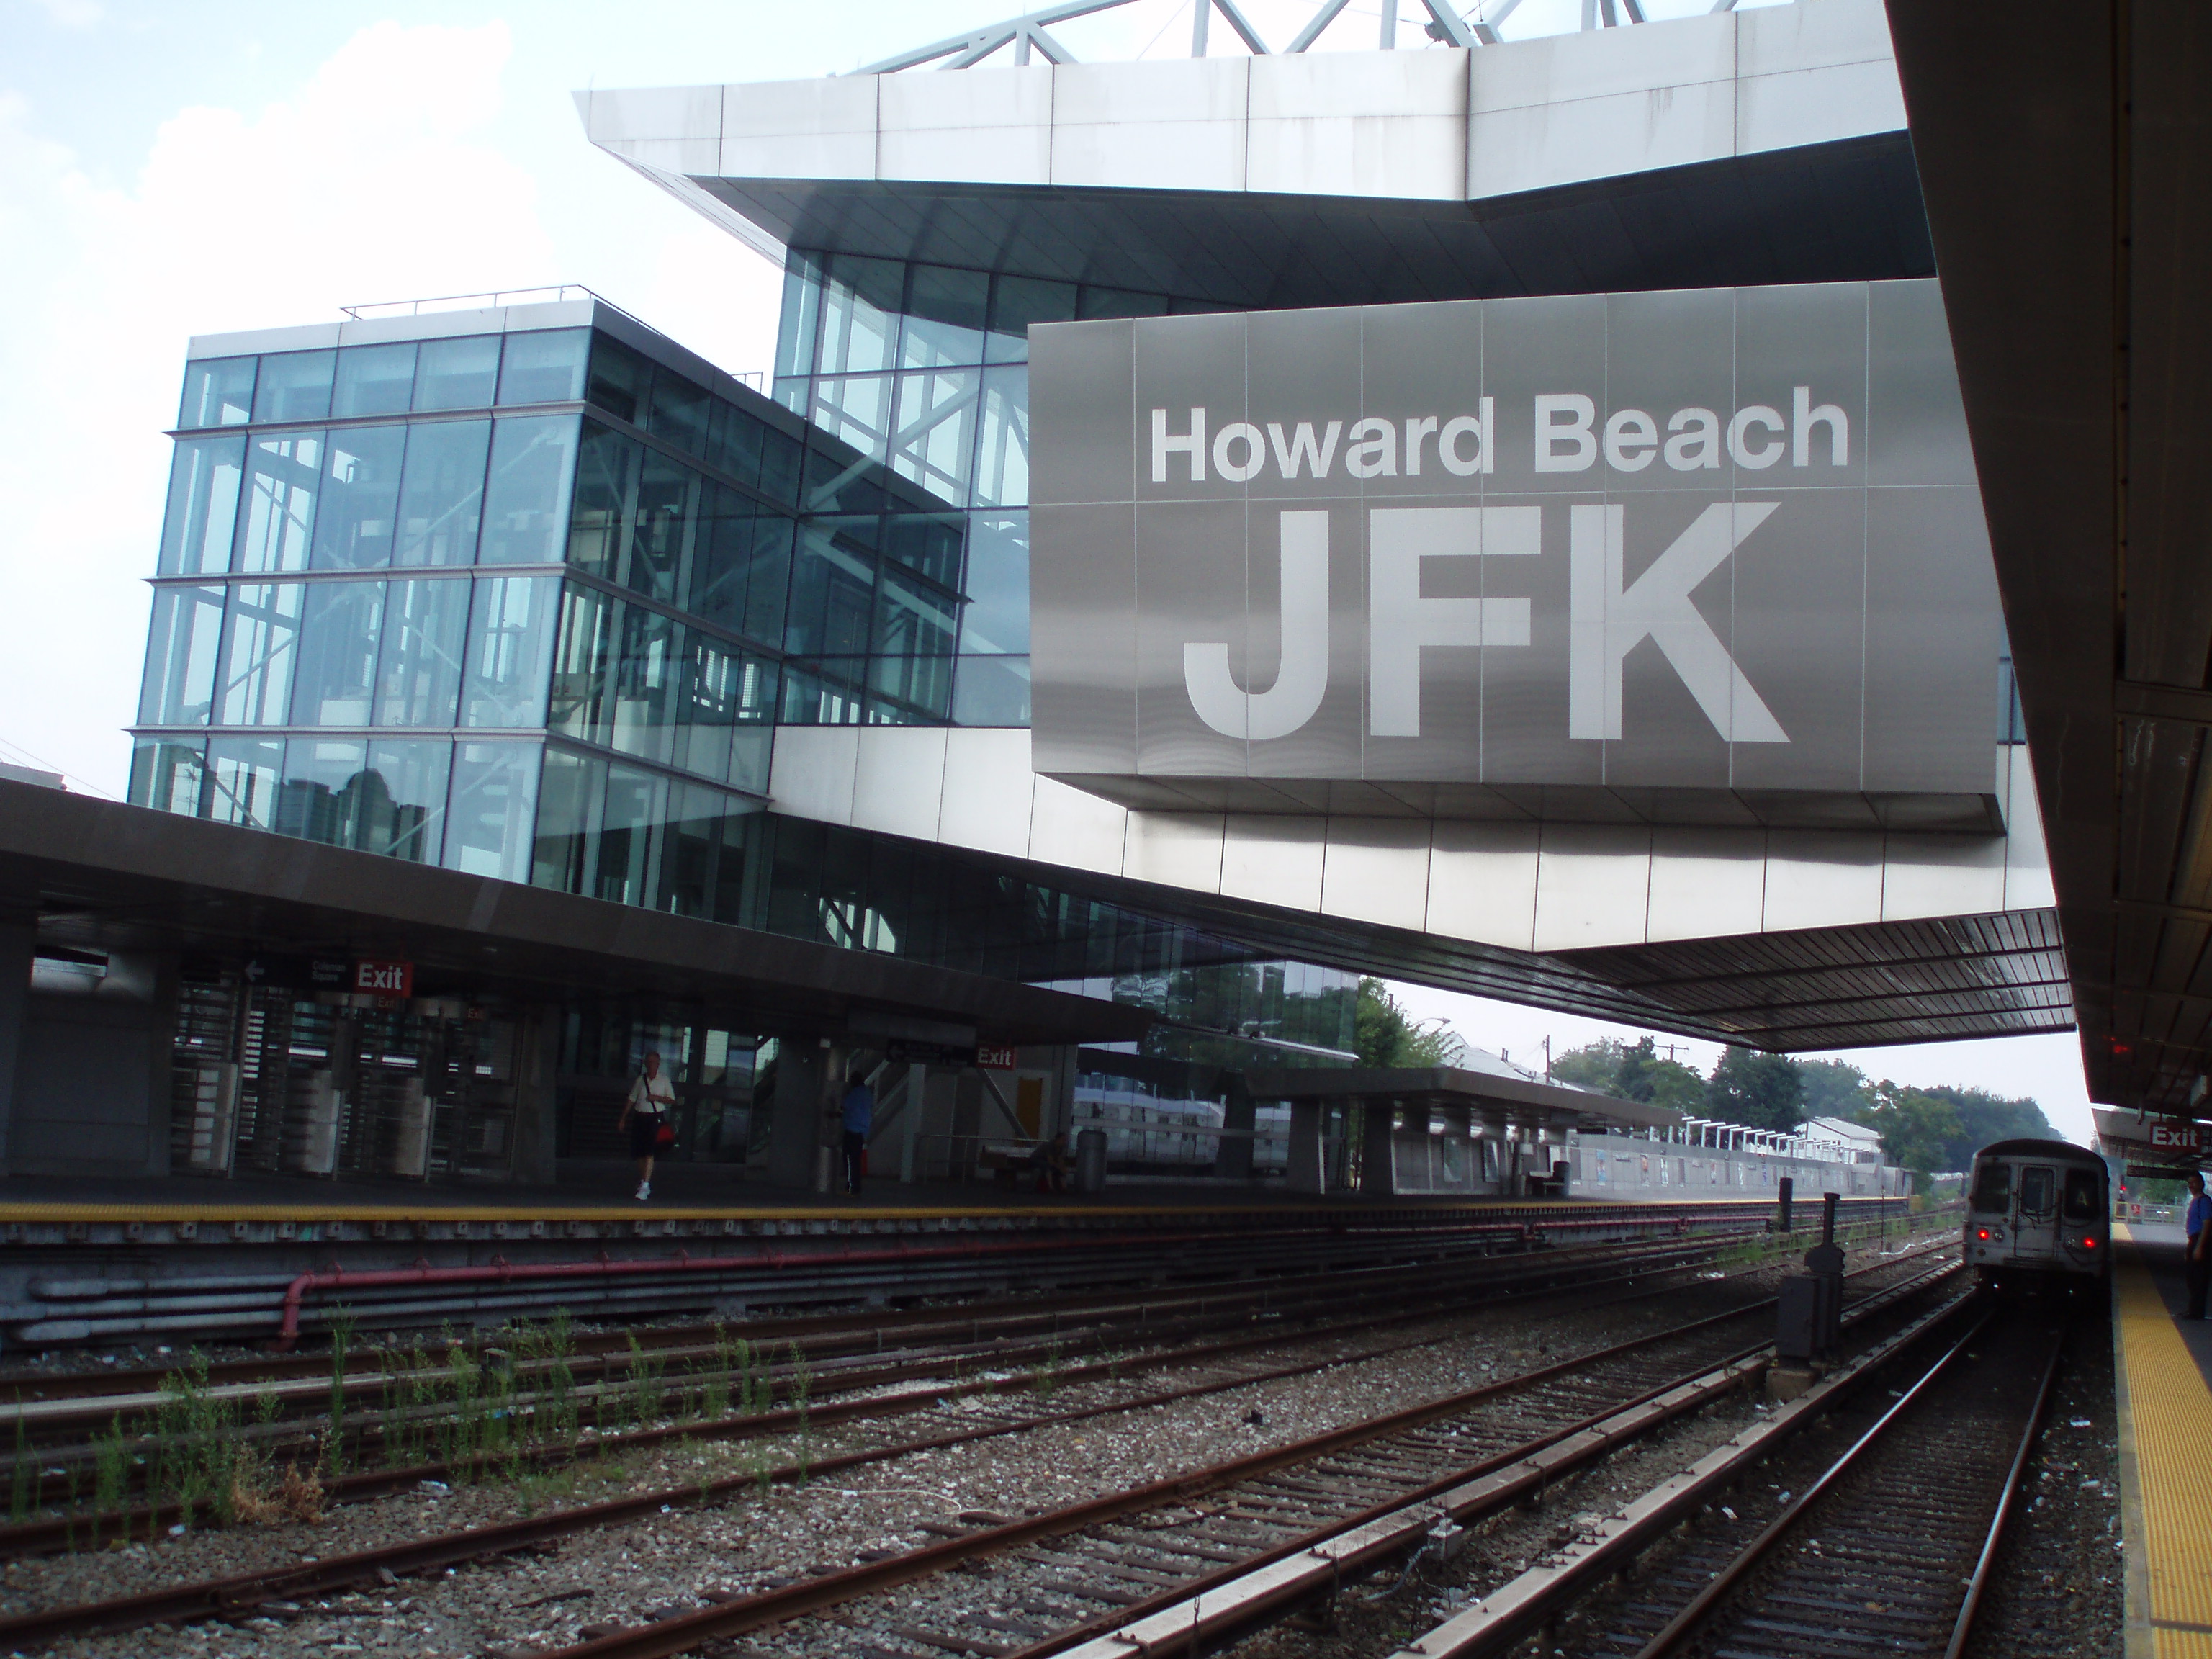 Head to Howard Beach station to catch the A train into Brooklyn and Manhattan